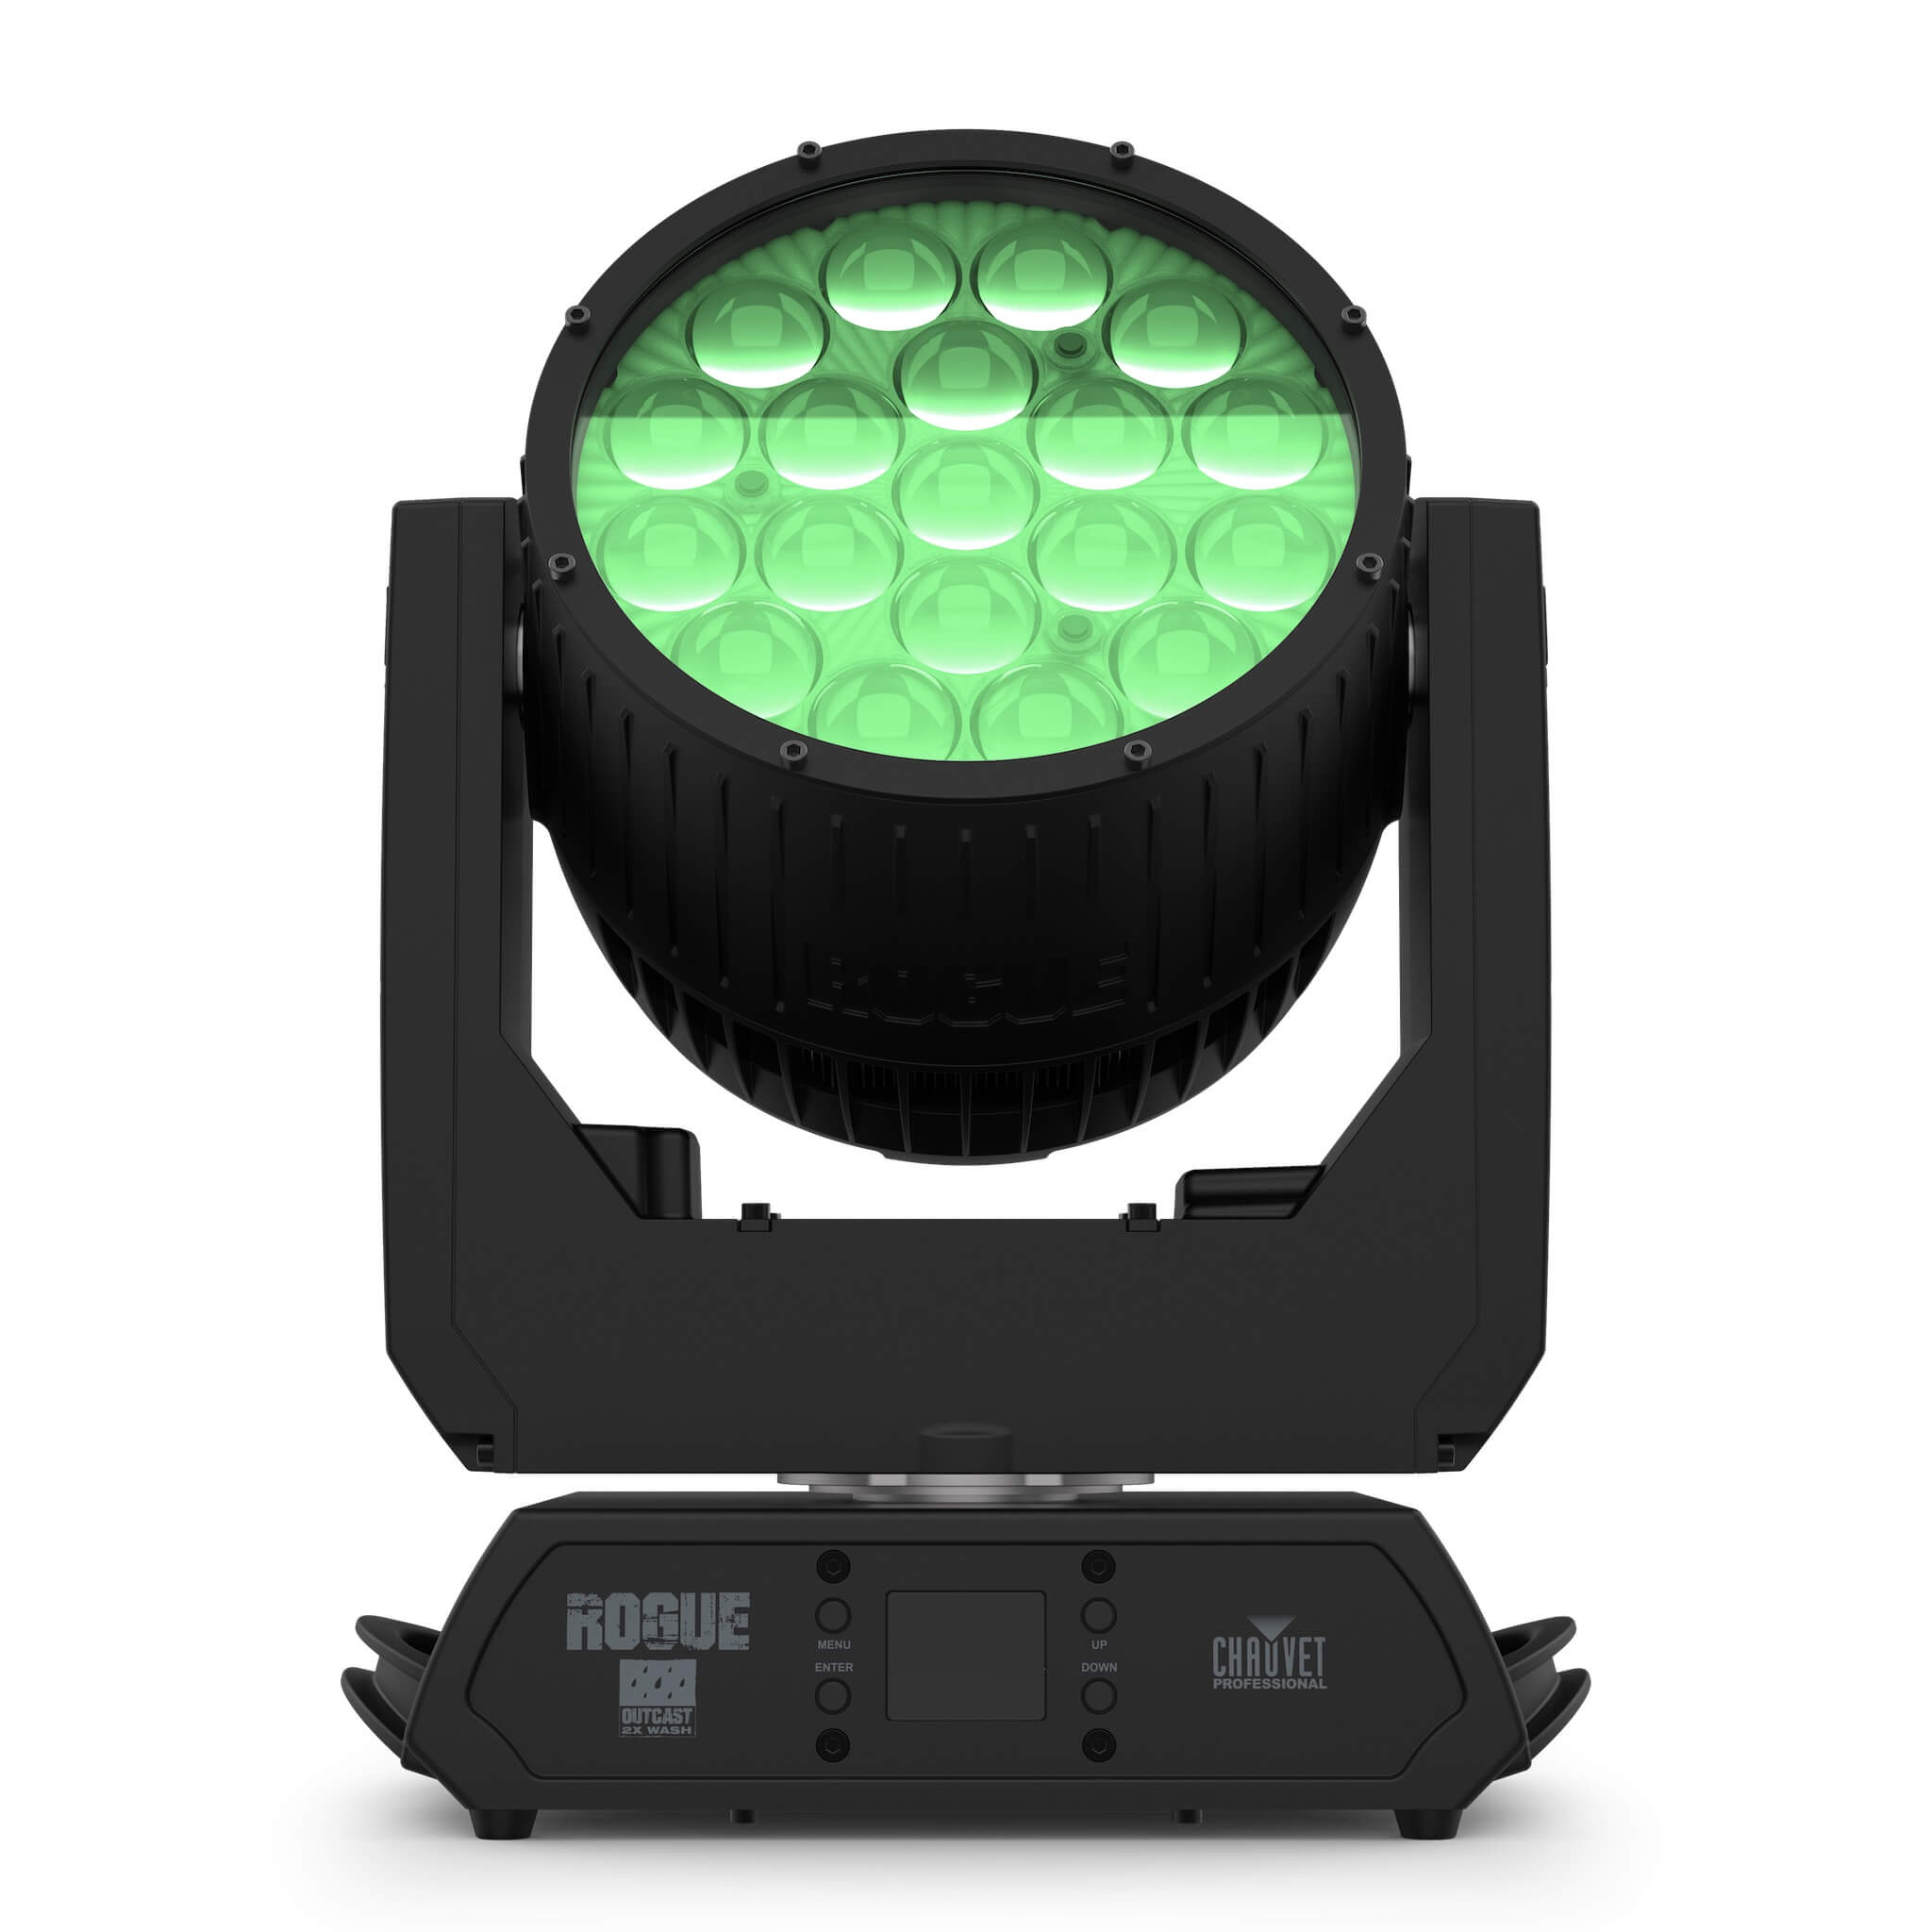 Chauvet Professional Rogue Outcast 2X Wash - LED Moving Head Light, front